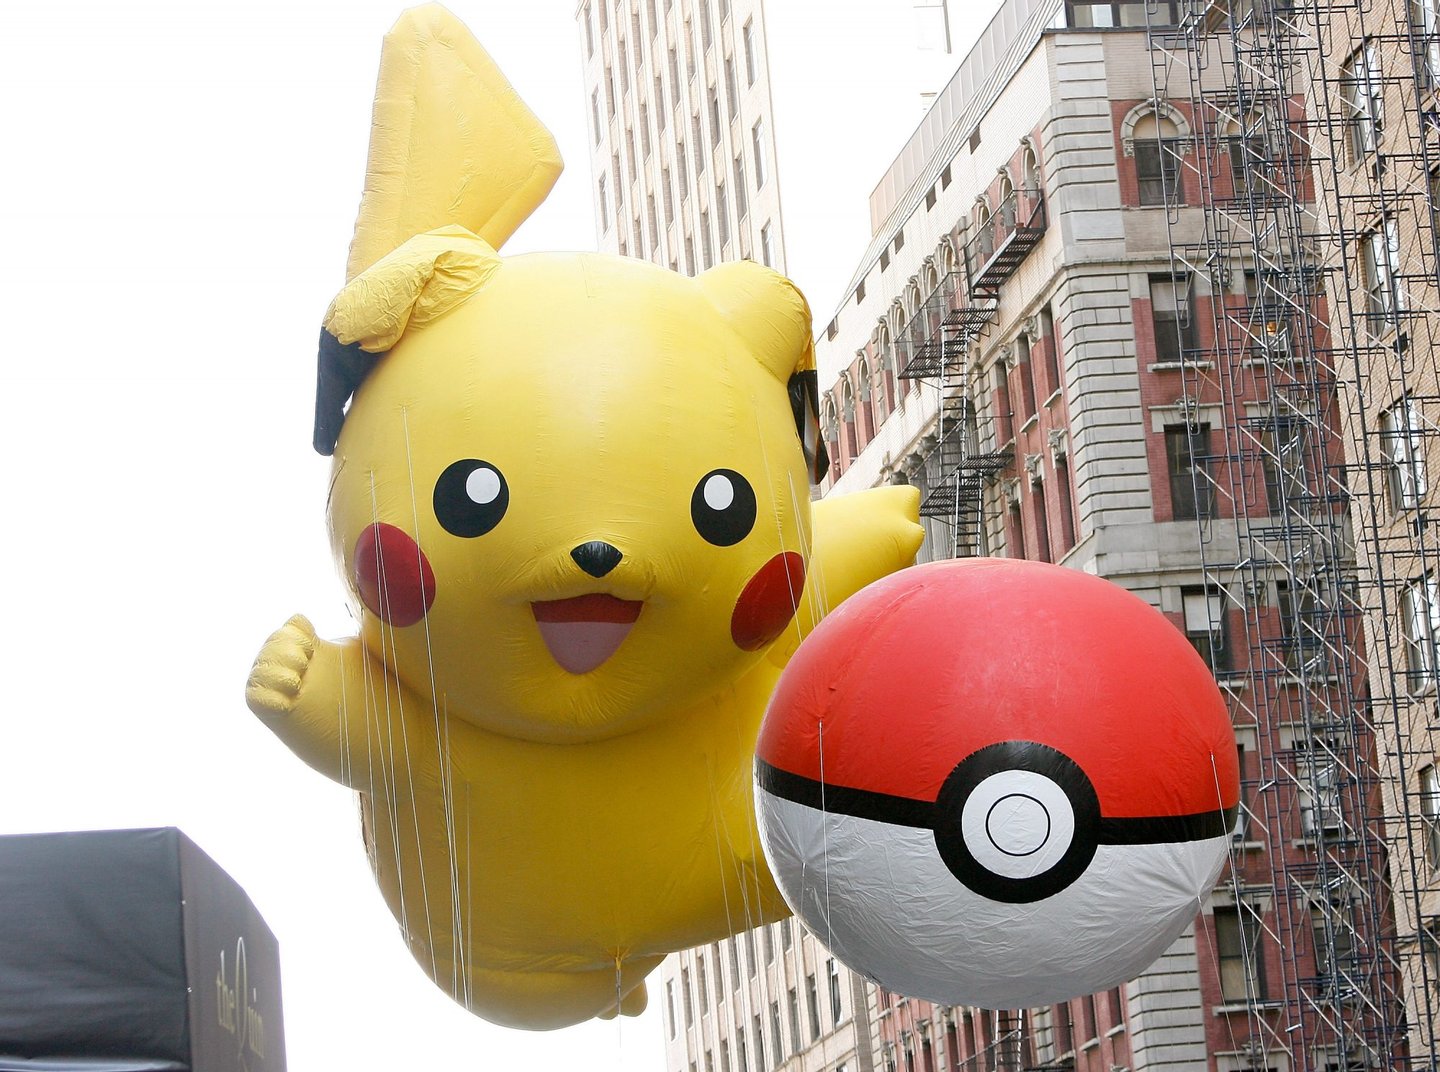 NEW YORK, NY - NOVEMBER 22: The Pikachu Pokemon balloons are seen during the 86th Annual Macy's Thanksgiving Day Parade on November 22, 2012 in New York City. (Photo by Mike Lawrie/Getty Images)